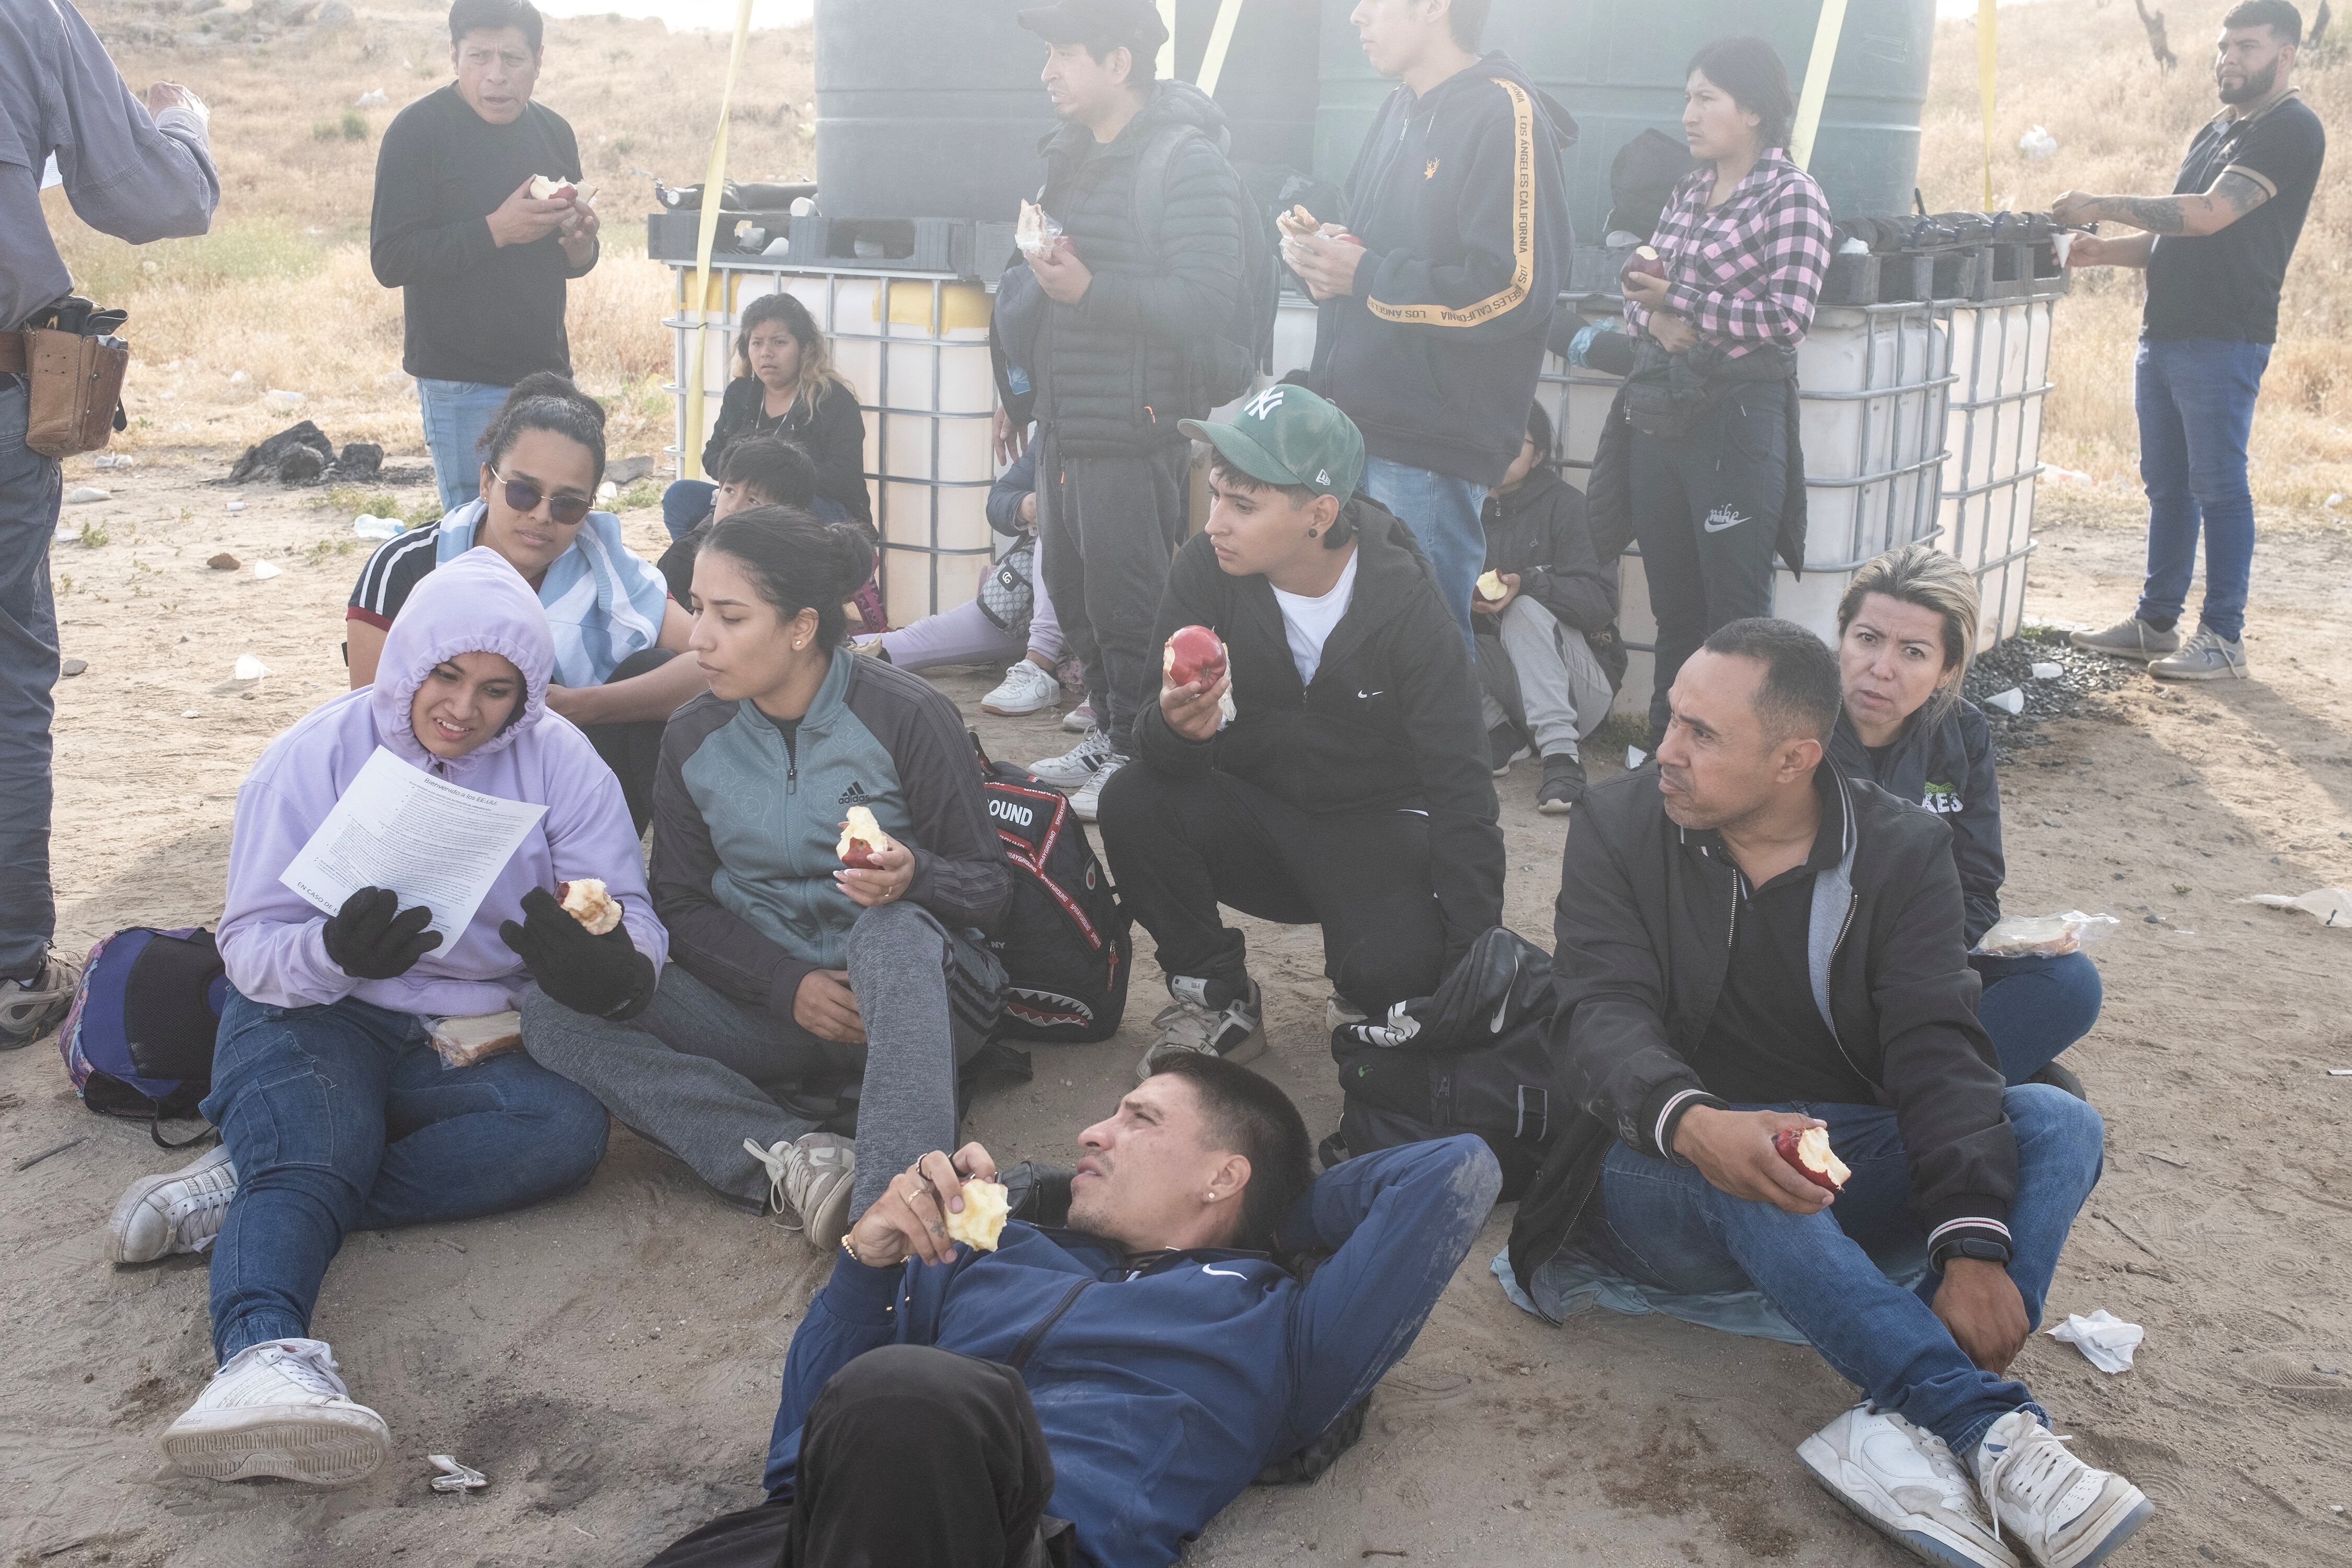 Migrants from Ecuador wait to be transported by the U.S. Border Patrol after crossing at Jacumba Spots, California, on June 4.